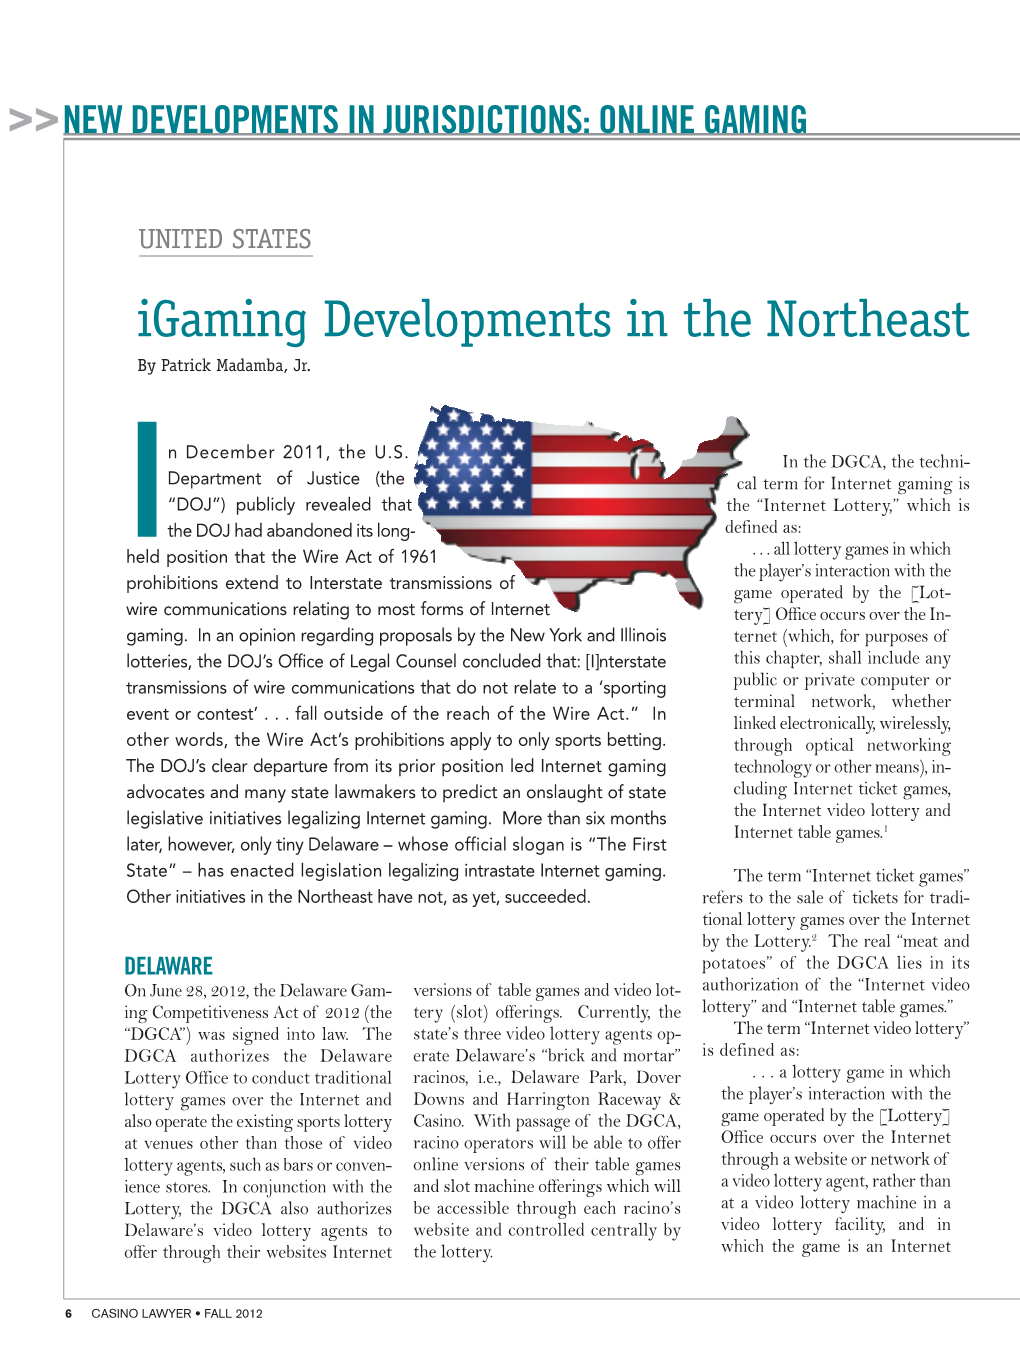 Igaming Developments in the Northeast by Patrick Madamba, Jr